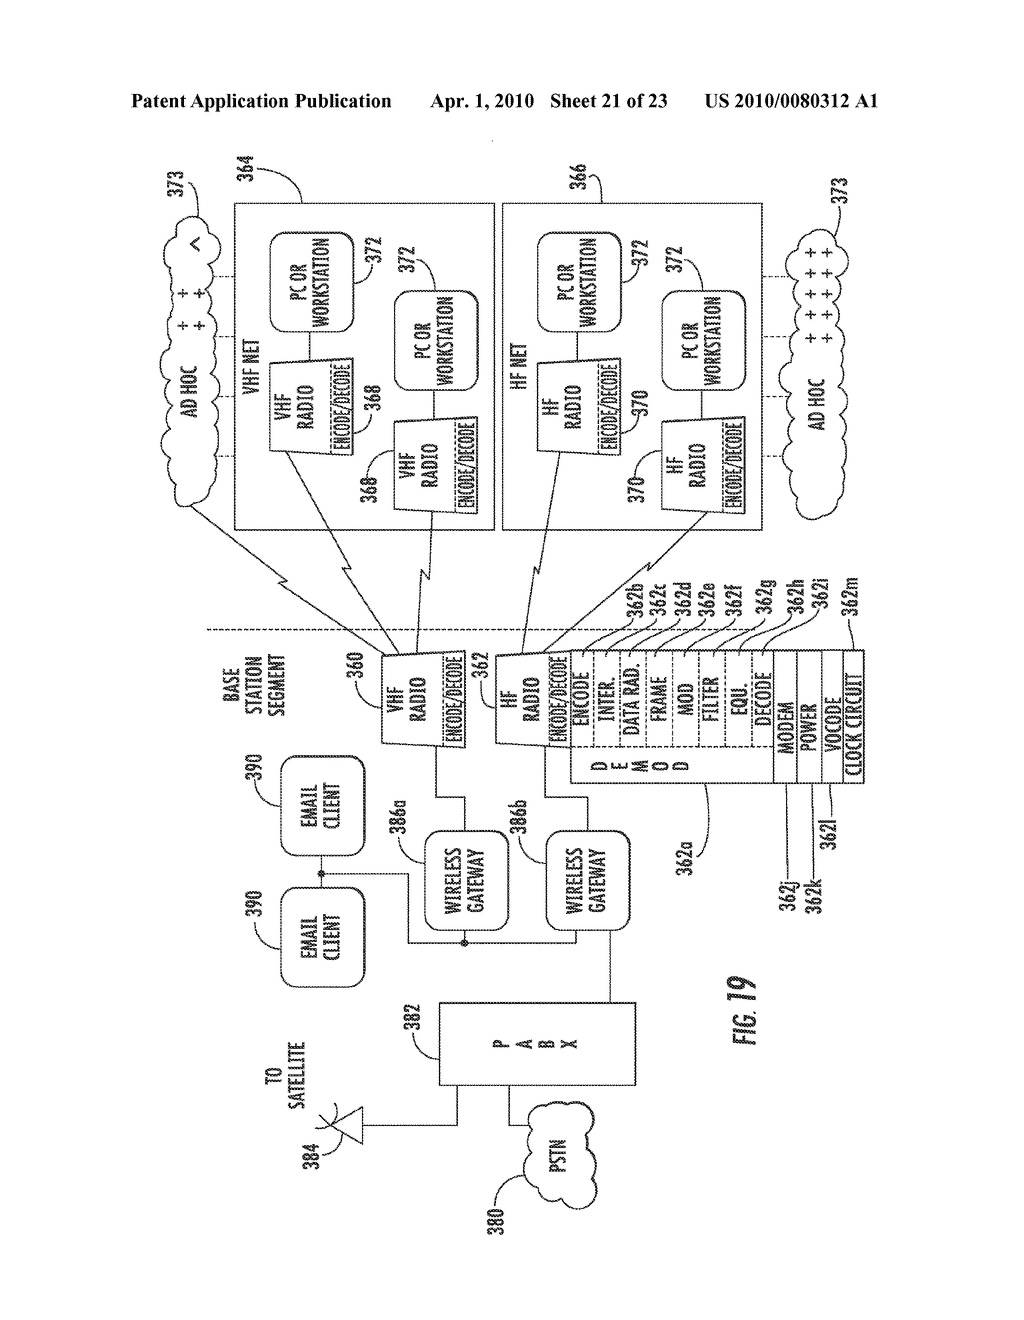 ORTHOGONAL FREQUENCY DIVISION MULTIPLEXING (OFDM) COMMUNICATIONS DEVICE AND METHOD THAT INCORPORATES LOW PAPR PREAMBLE WITH CIRCUIT FOR MEASURING FREQUENCY RESPONSE OF THE COMMUNICATIONS CHANNEL - diagram, schematic, and image 22